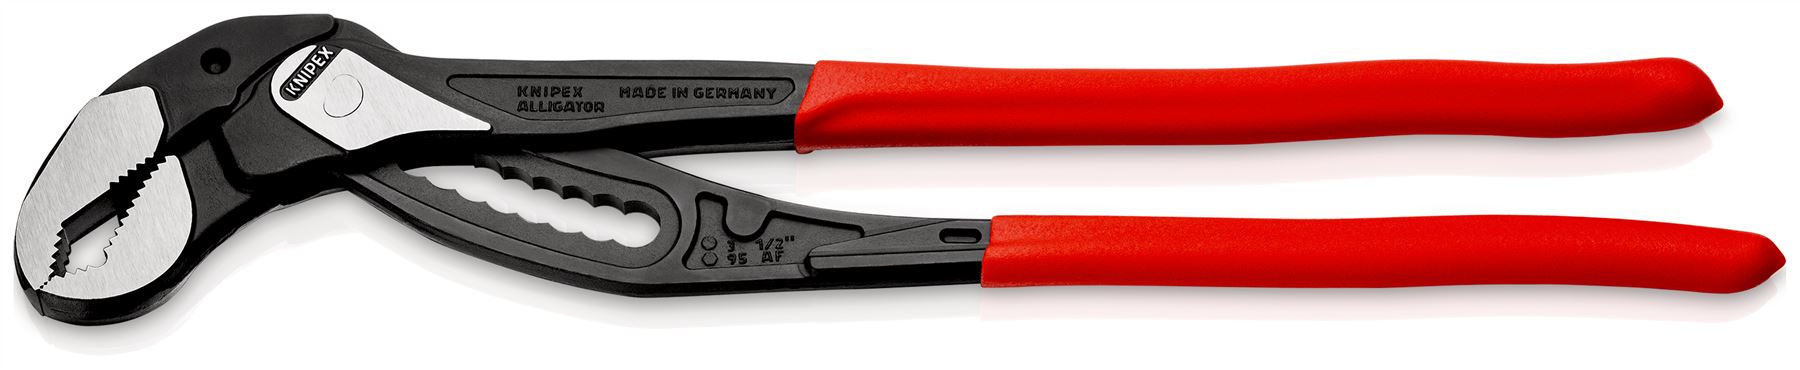 KNIPEX Alligator XL Water Pump Pliers 400mm Plastic Coated Handles Non Slip 88 01 400